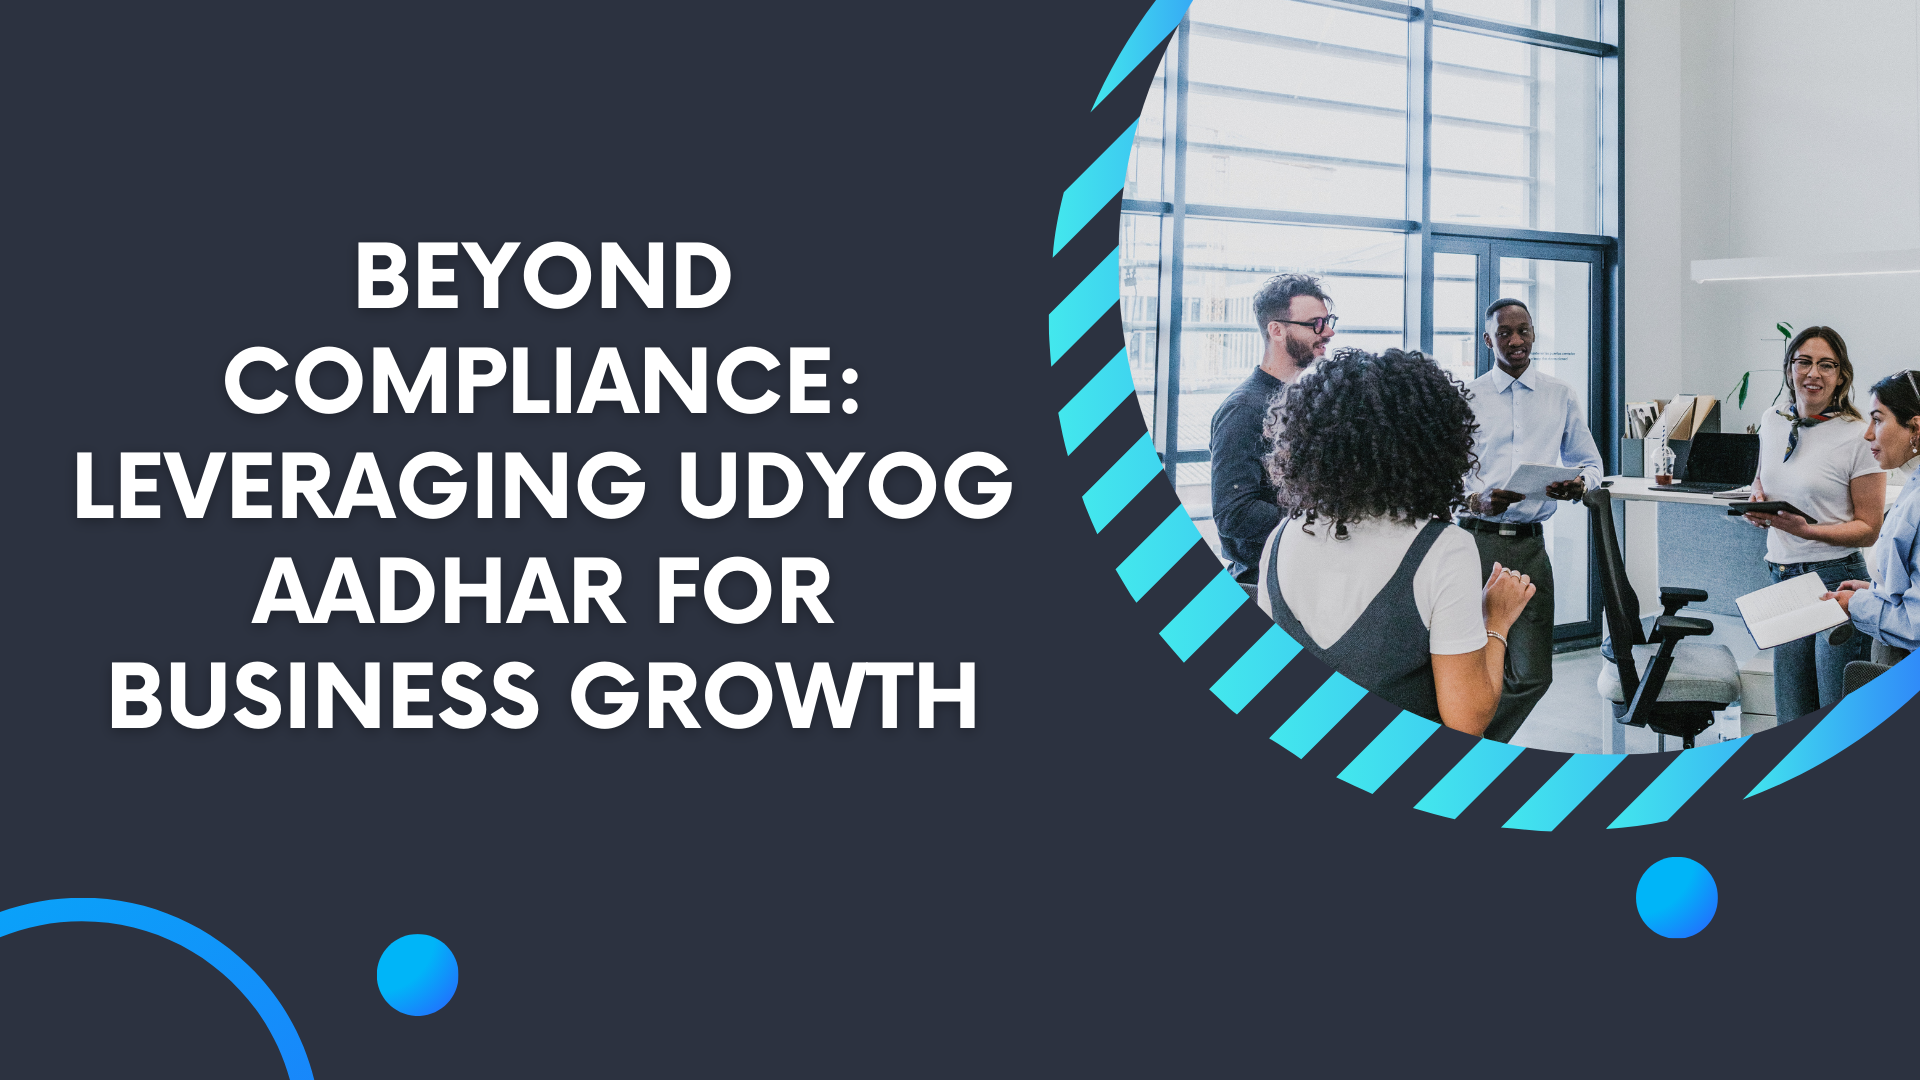 Udyog Aadhar has emerged not just as a compliance requirement but as a powerful catalyst for business growth.